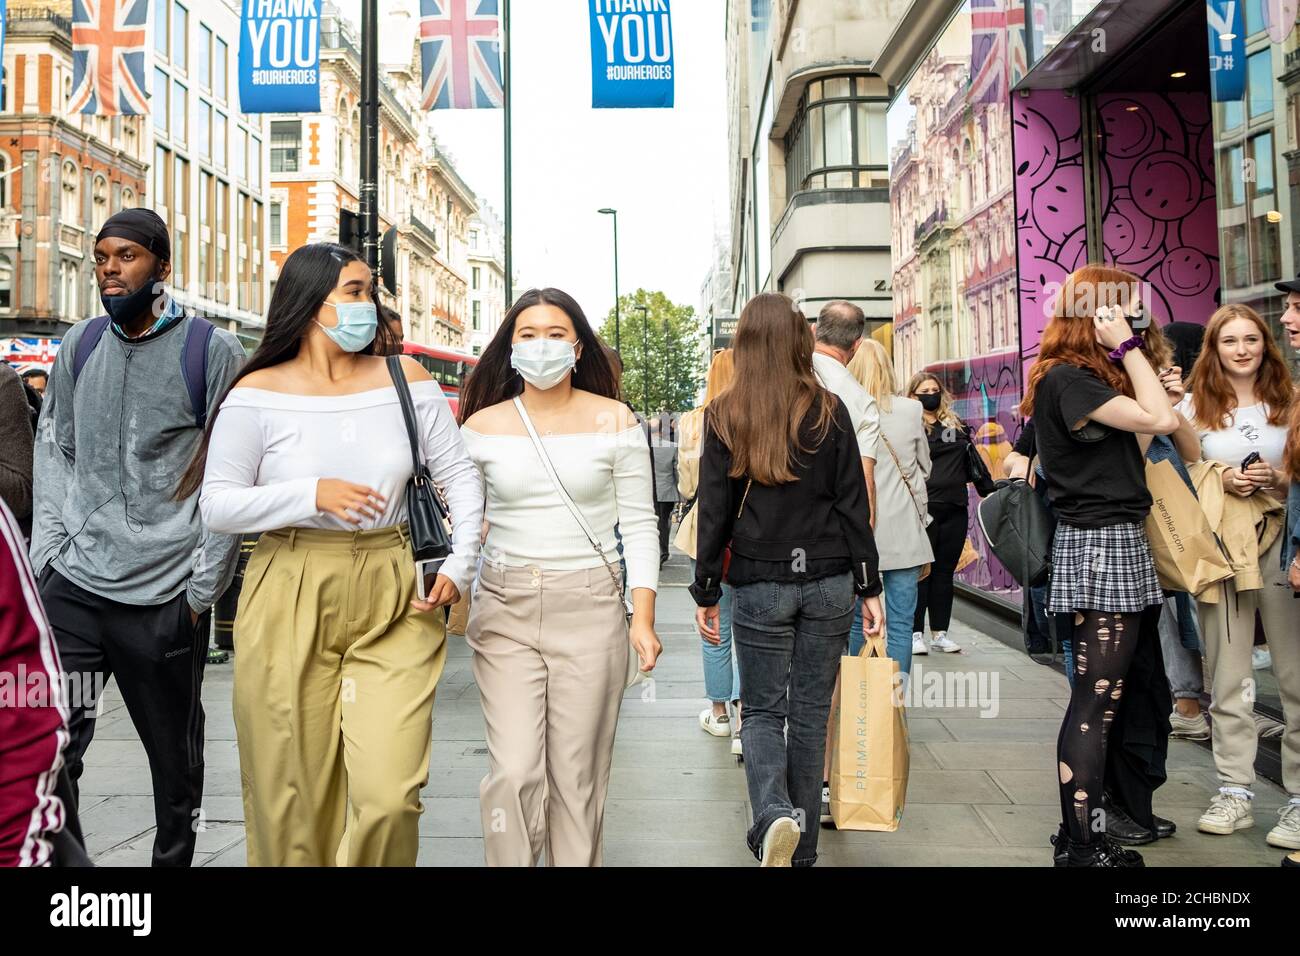 London- September, 2020: Shoppers on Oxford Street wearing Covid 19 face masks Stock Photo